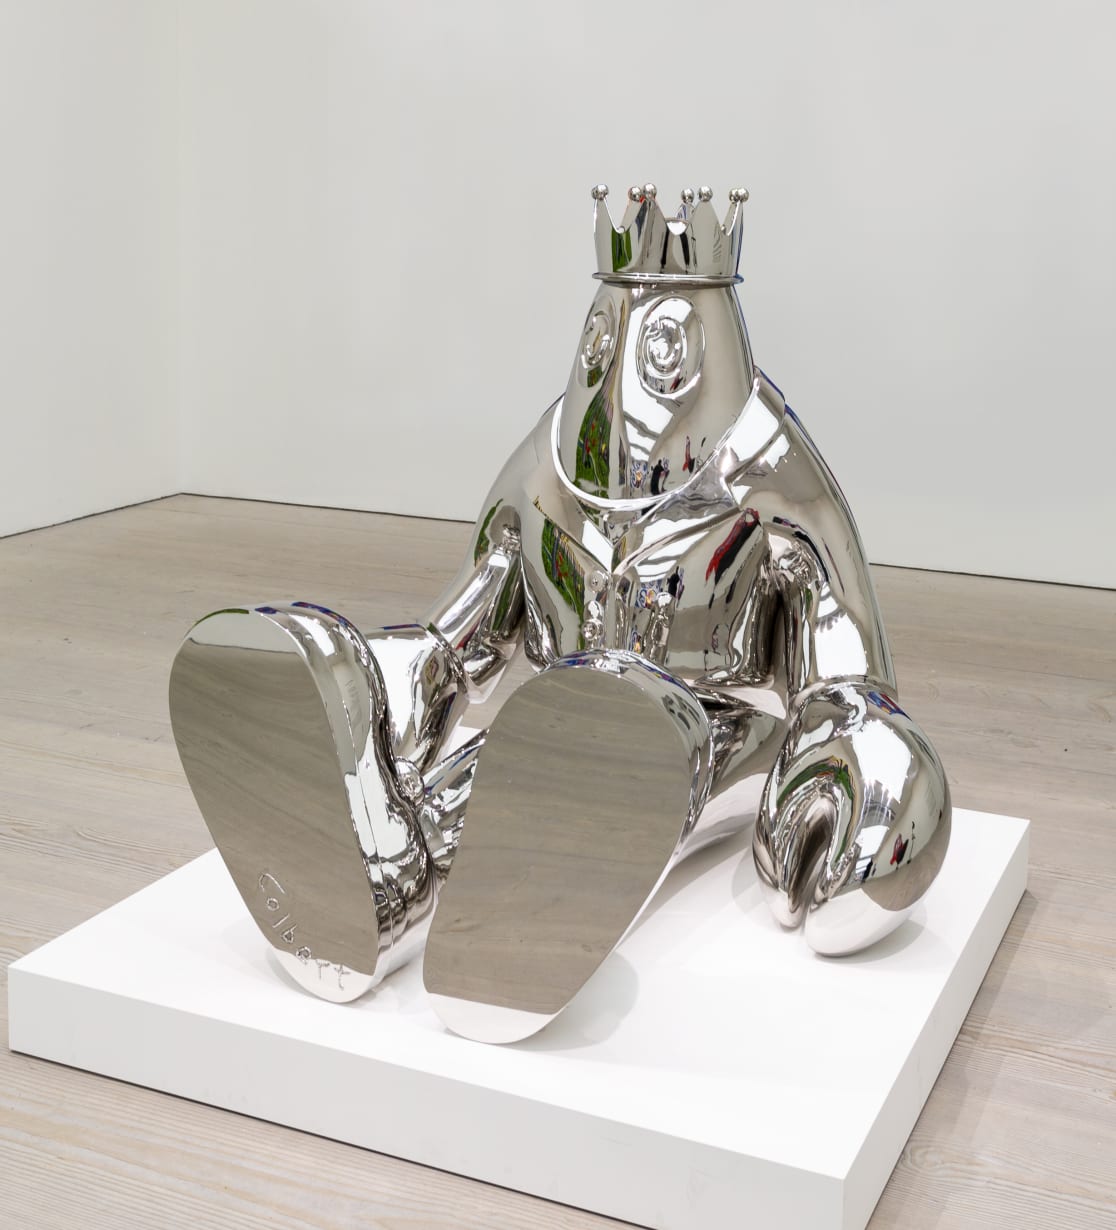 Daydreamer (Seated Lobster), 2020Polished stainless steel150 cm x 140 cm x 140 cm ENQUIRE